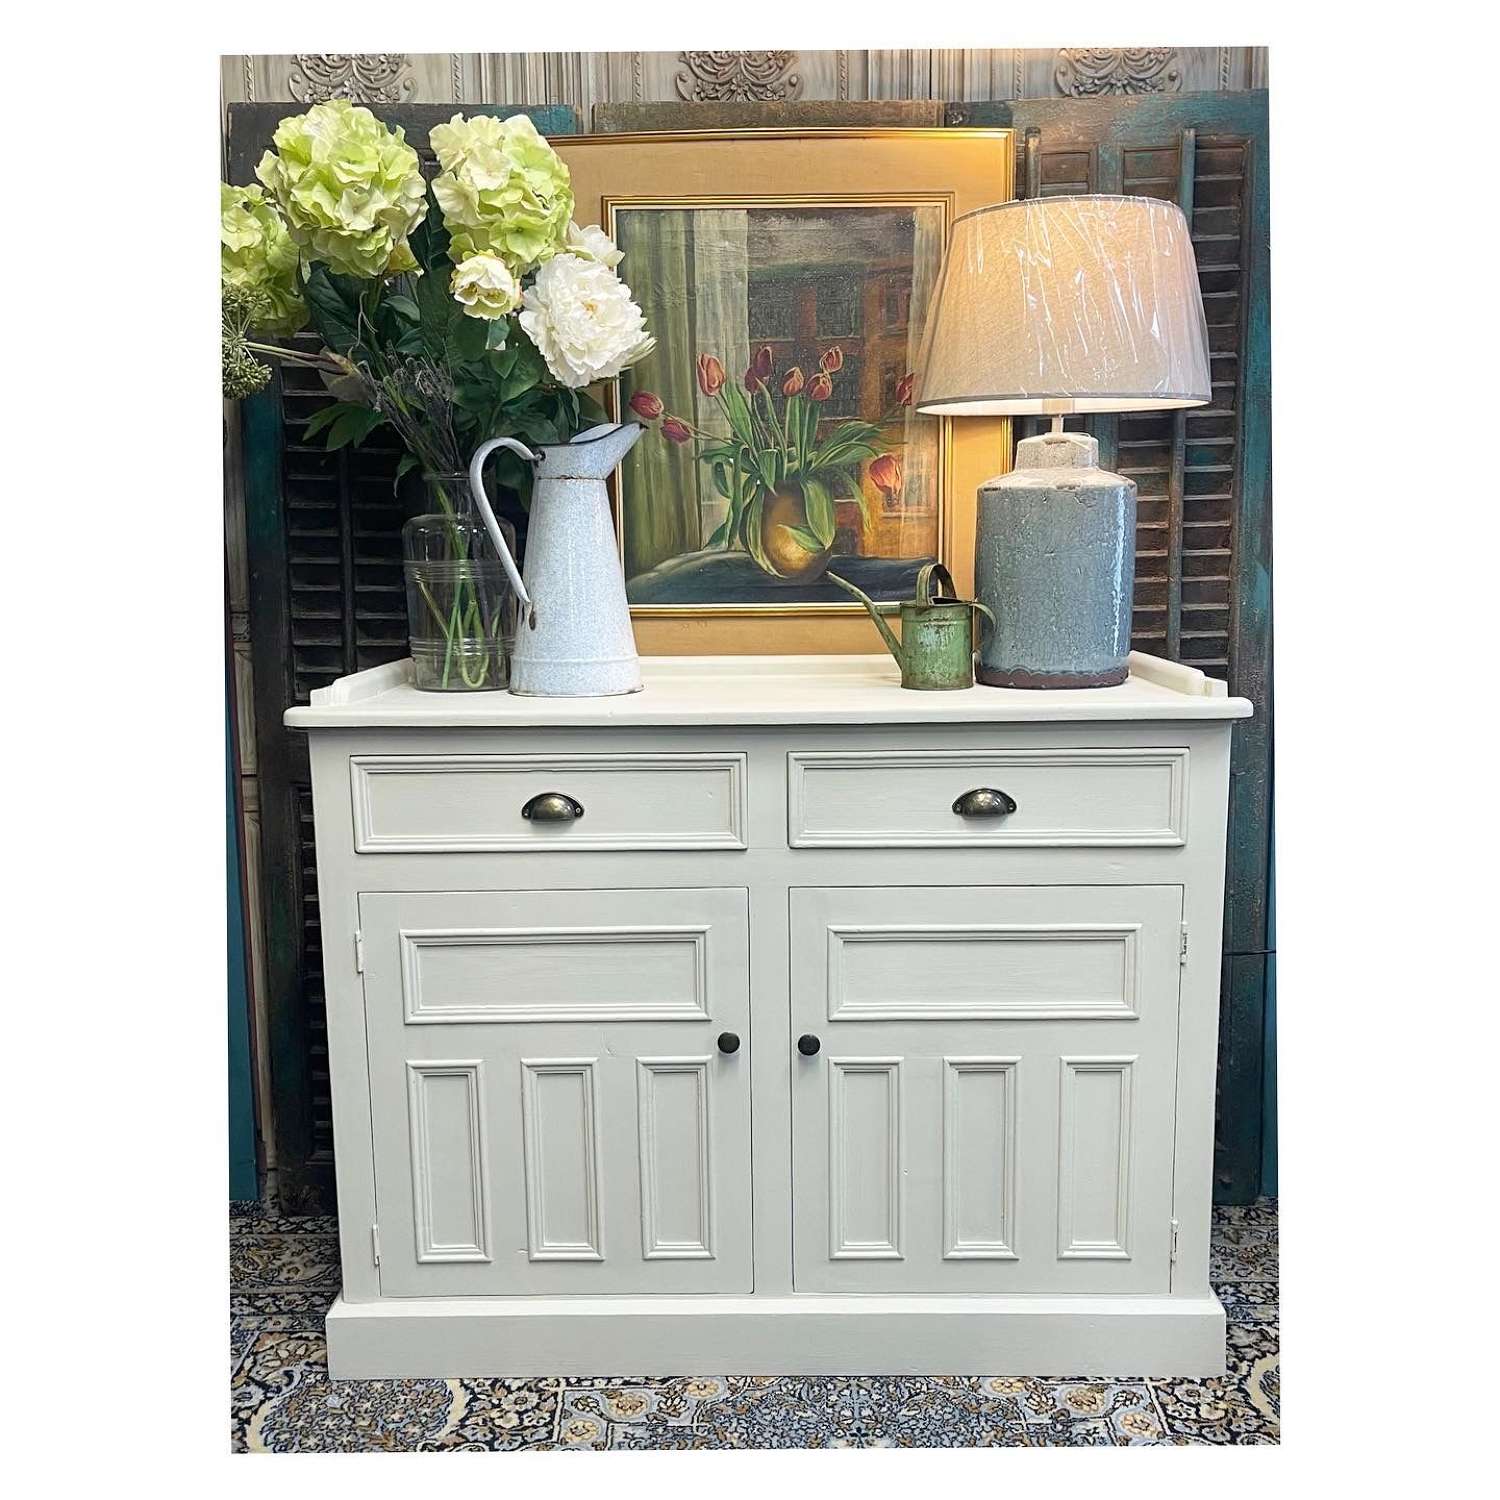 Painted Pine Kitchen Cupboard, Sideboard